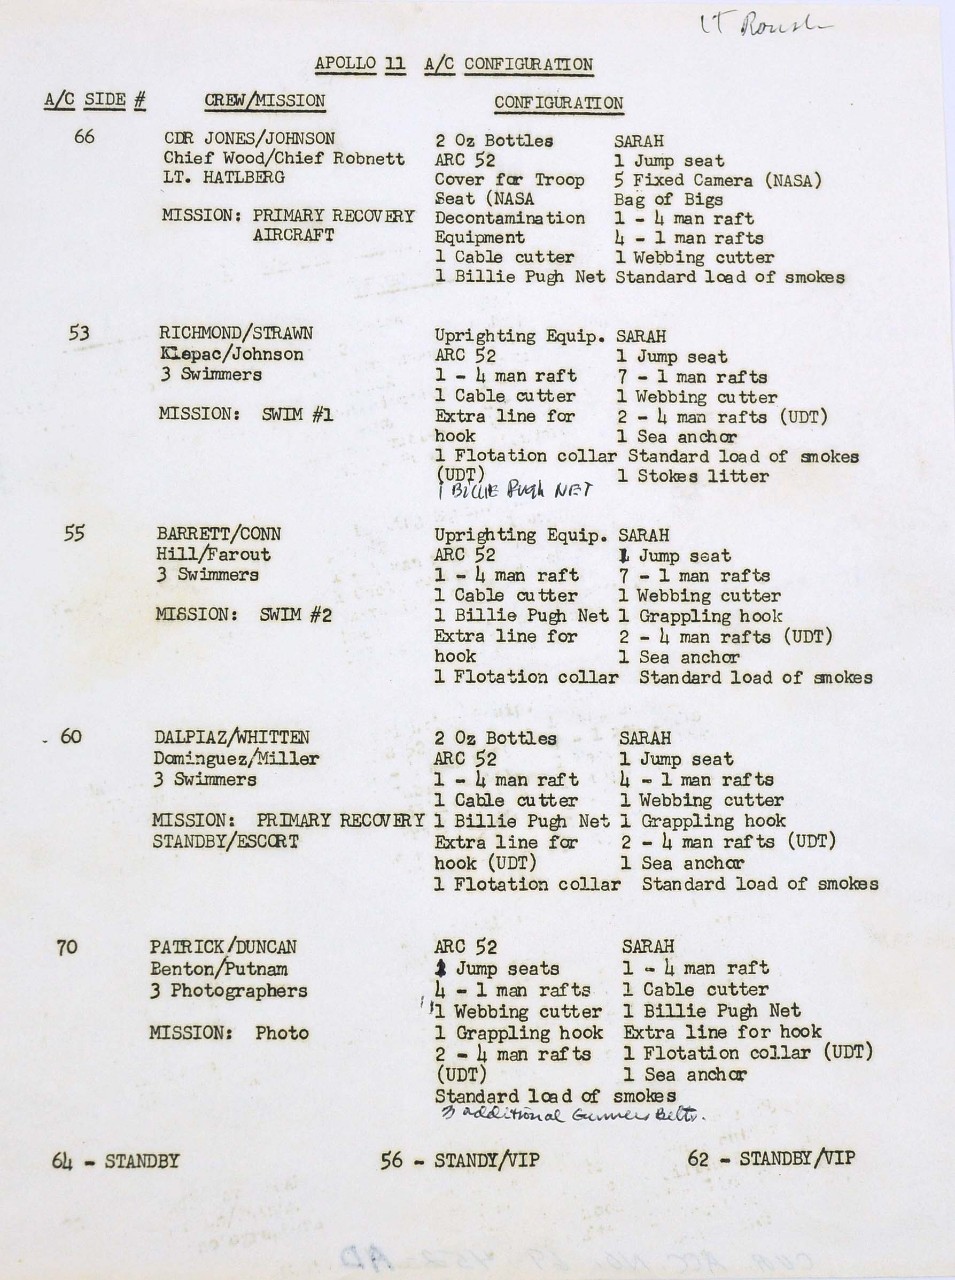 One sheet of paper with typed list of the helicopters, personnel, and equipment required for the recovery of the Apollo 11 astronauts, titled "Apollo 11 A/C Configuration."